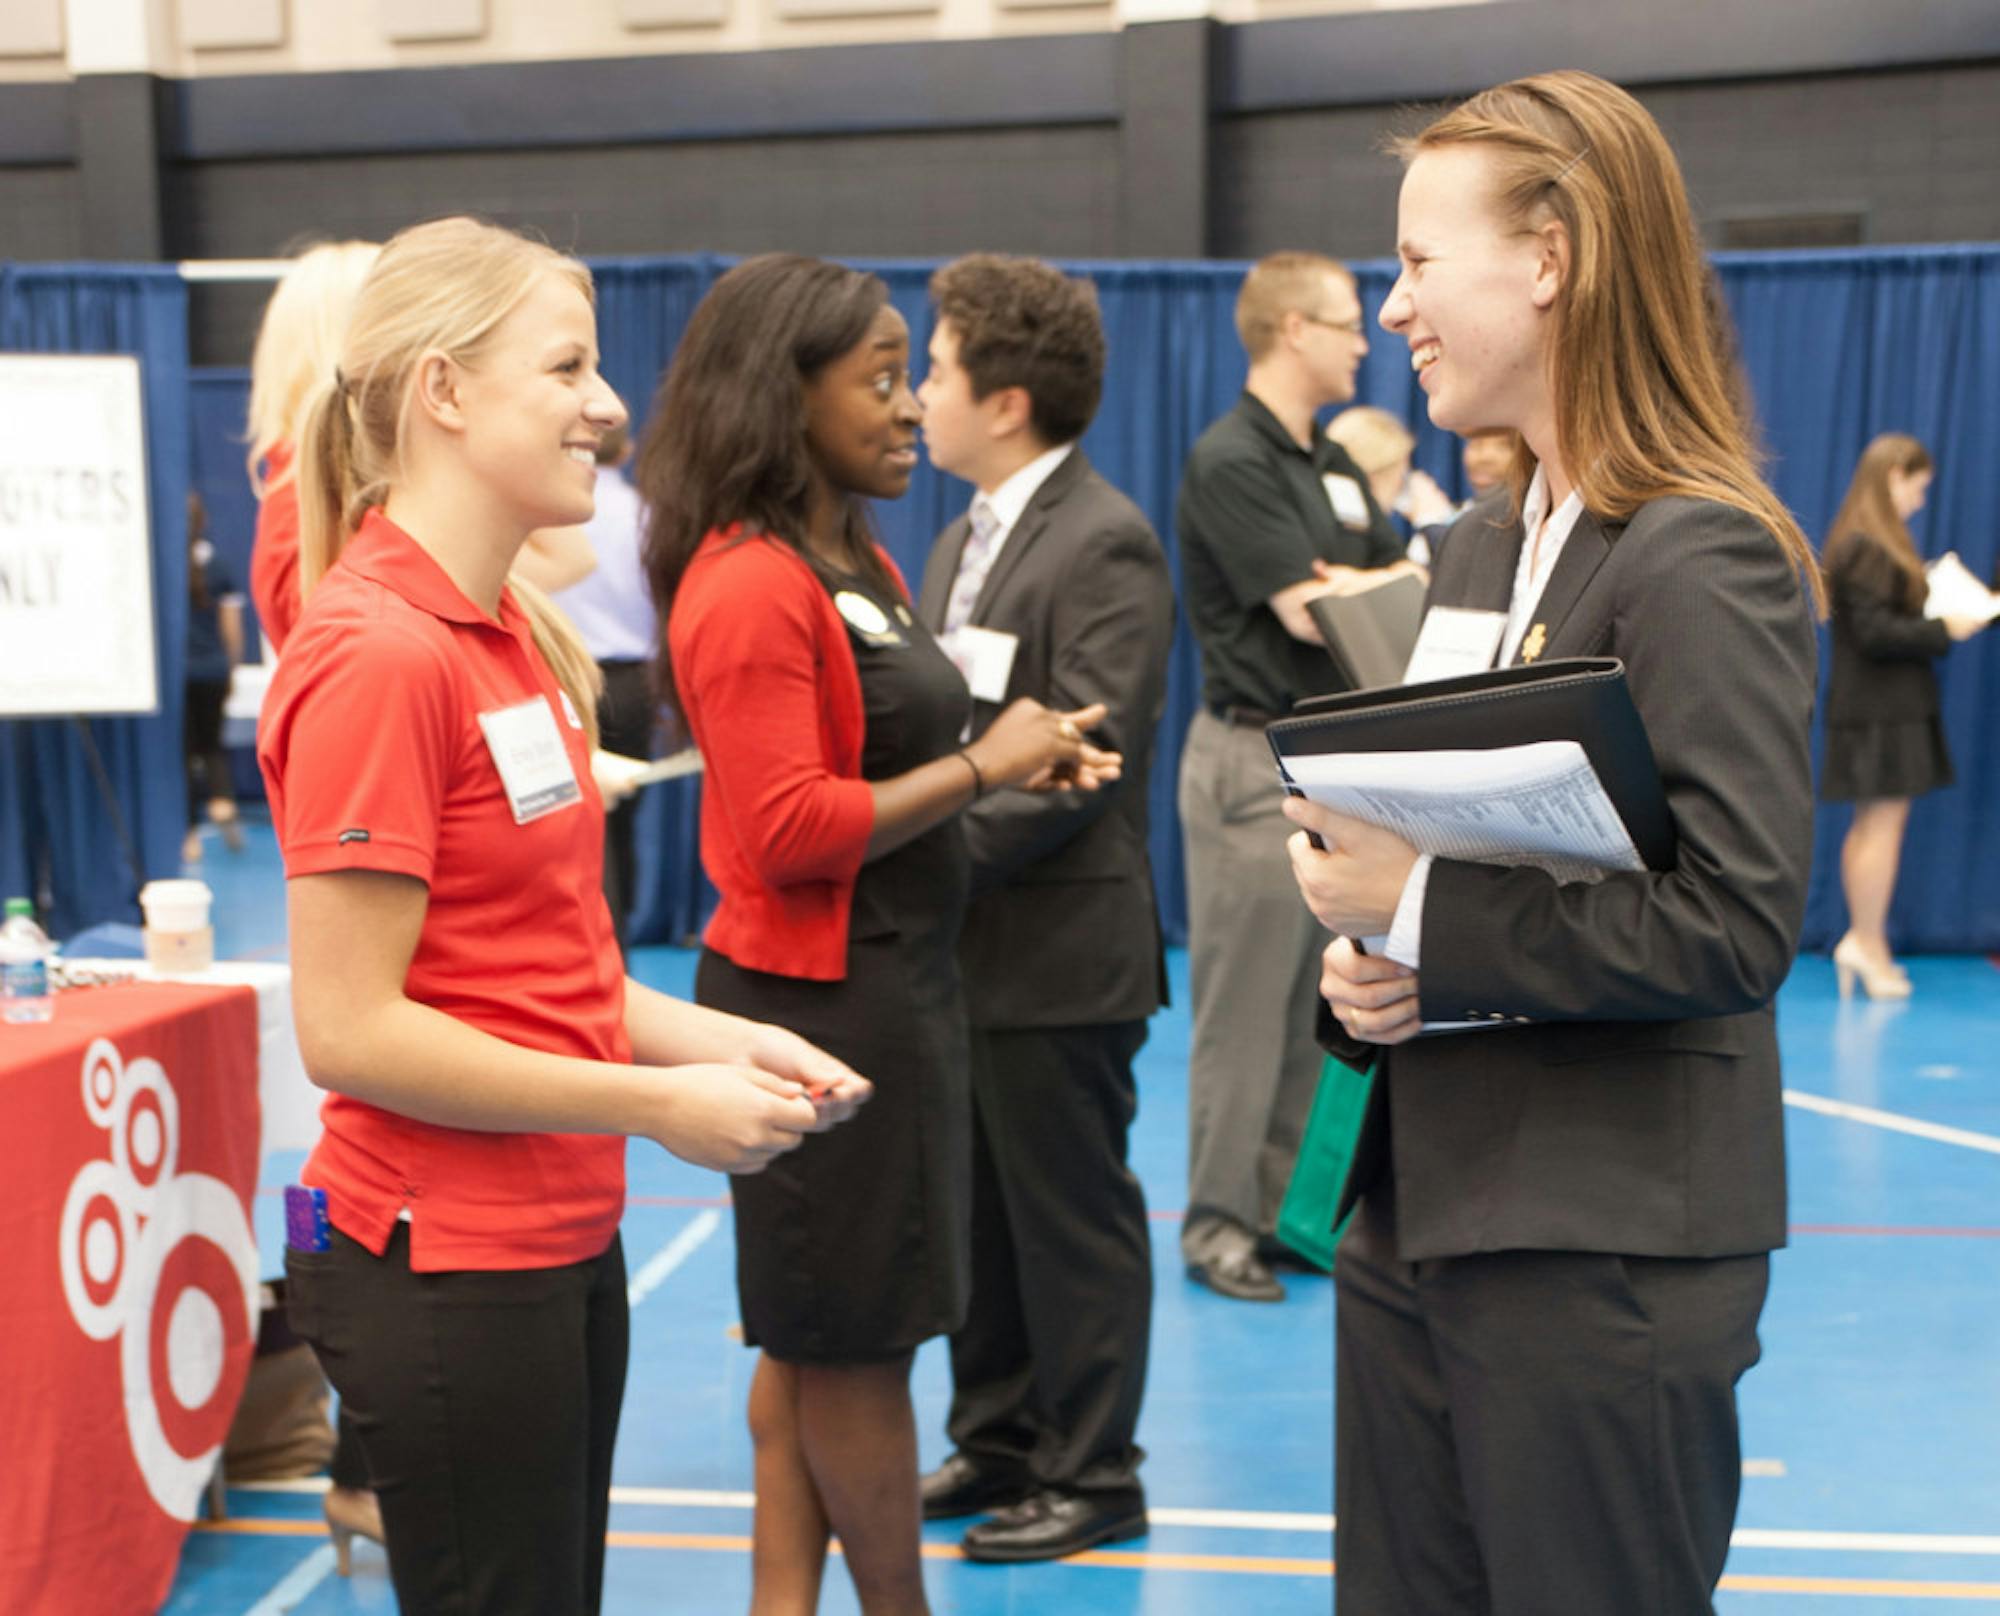 Students will meet with business representatives from 133 employers tonight in hopes of professional experience, whether it may be a job after graduation or a summer internship.